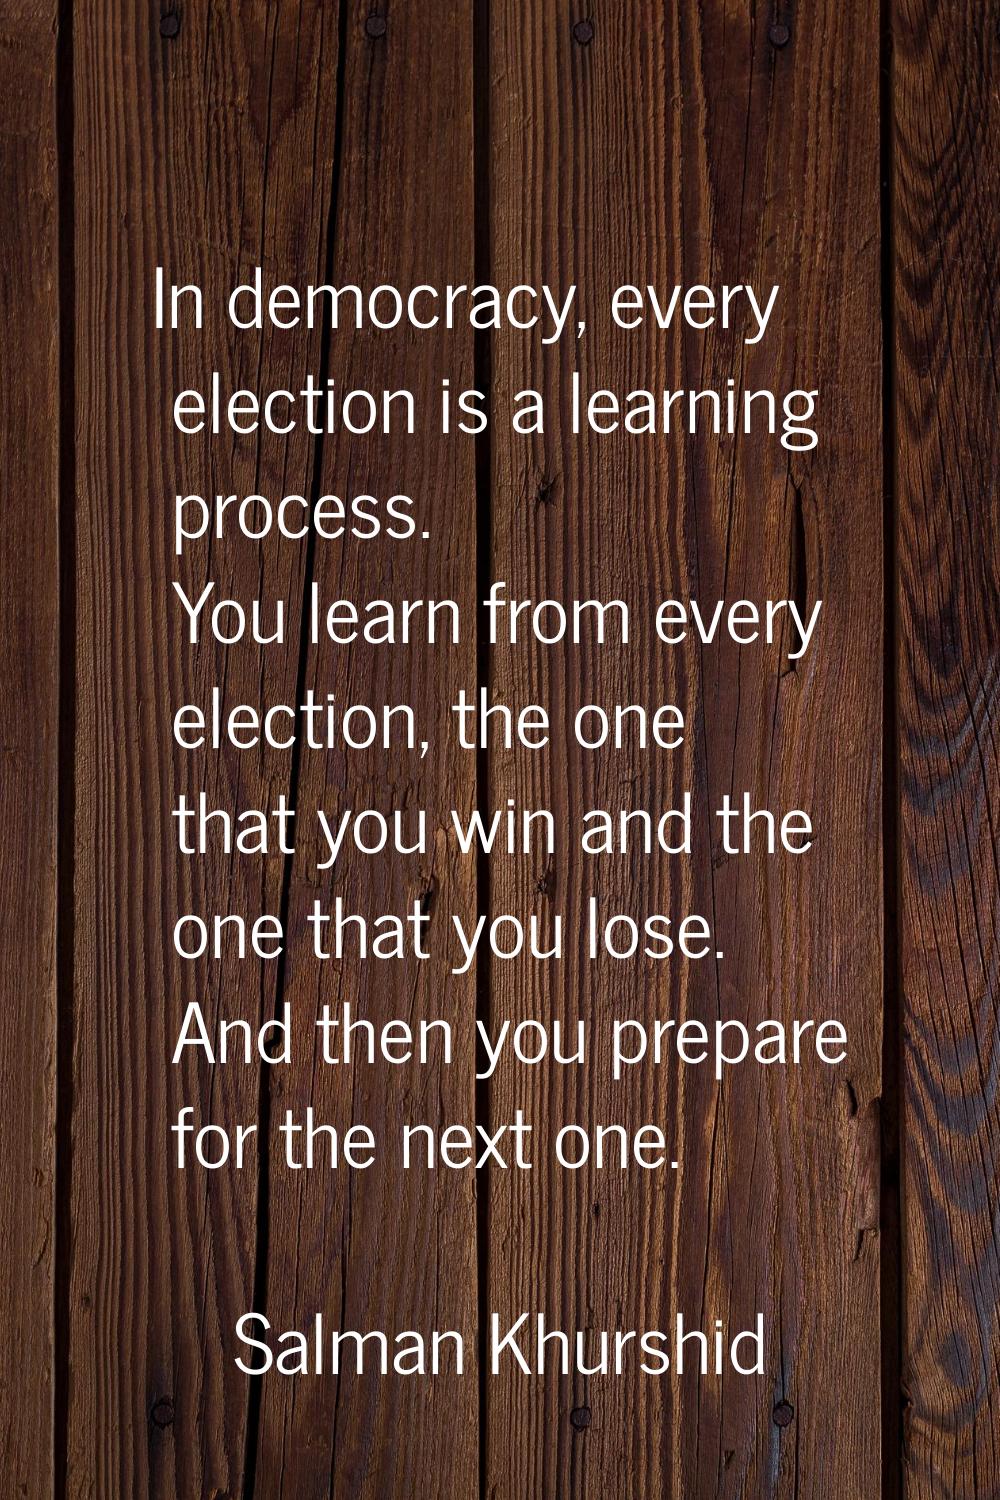 In democracy, every election is a learning process. You learn from every election, the one that you